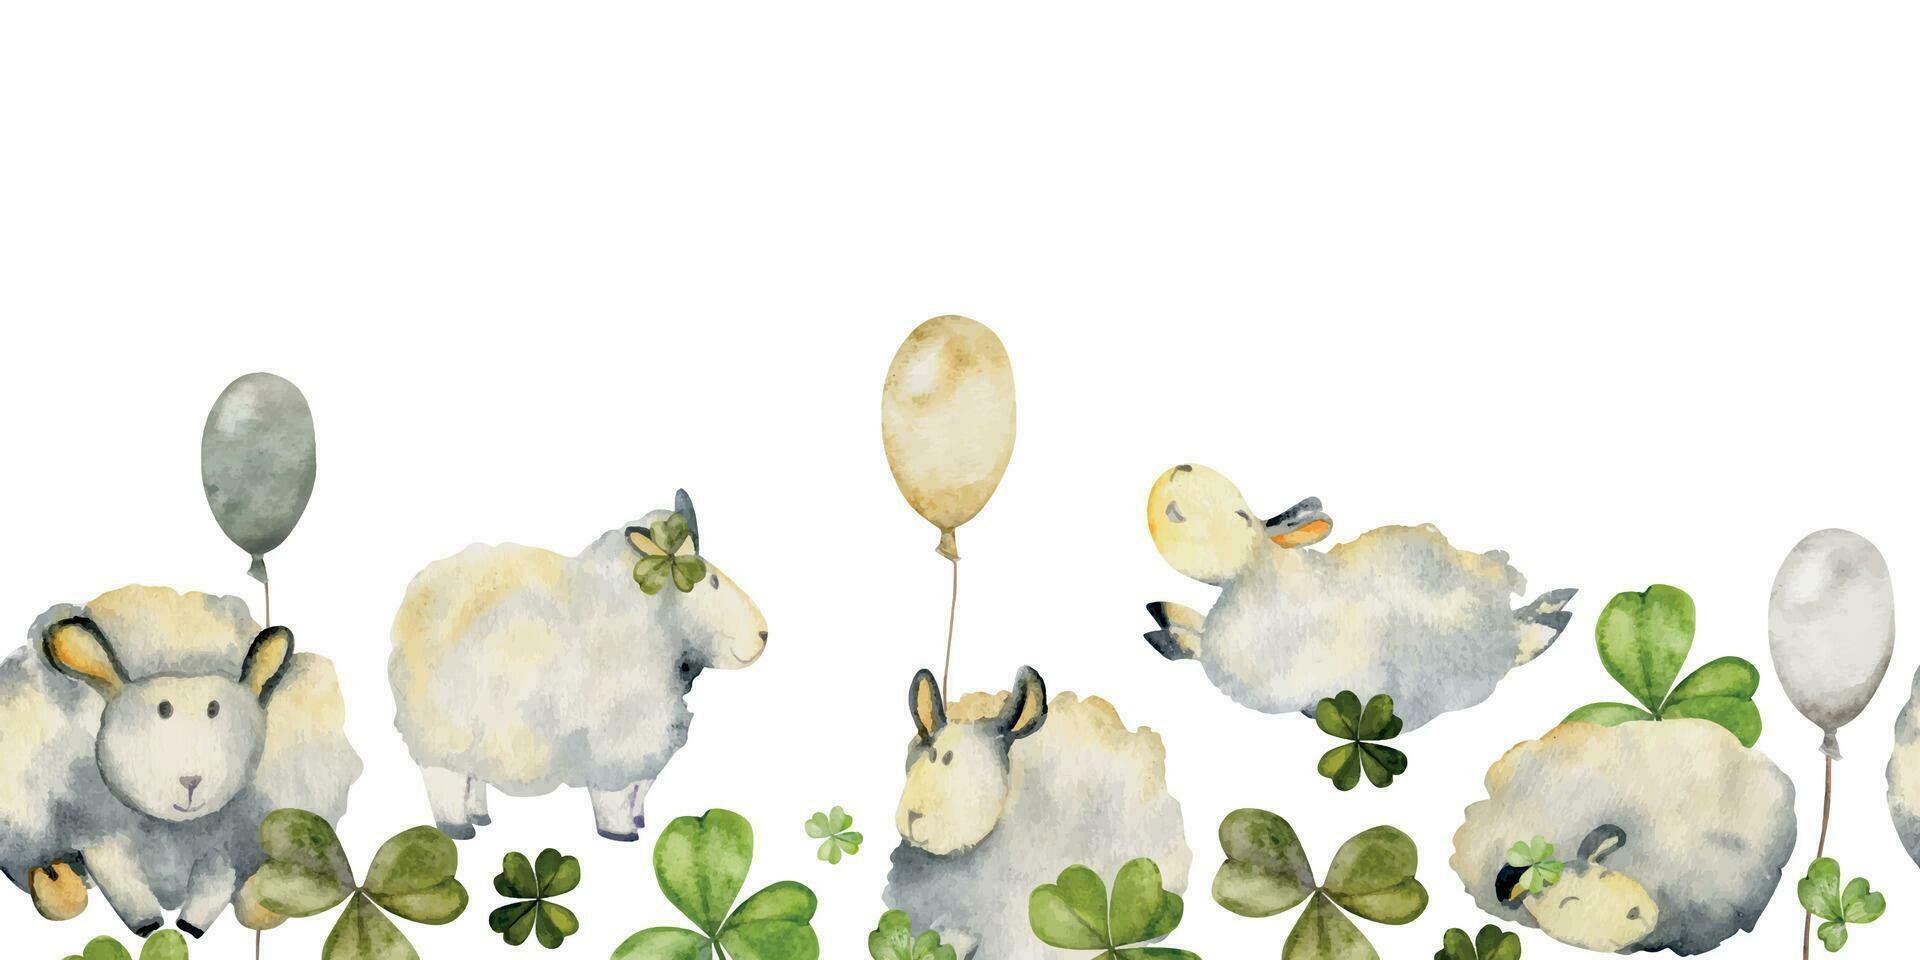 Watercolor hand drawn illustration, cute plush baby sheep with balloons, lucky green four-leaf clover field. Seamless border Isolated on white background. Kids, children bedroom, fabric, linens print vector